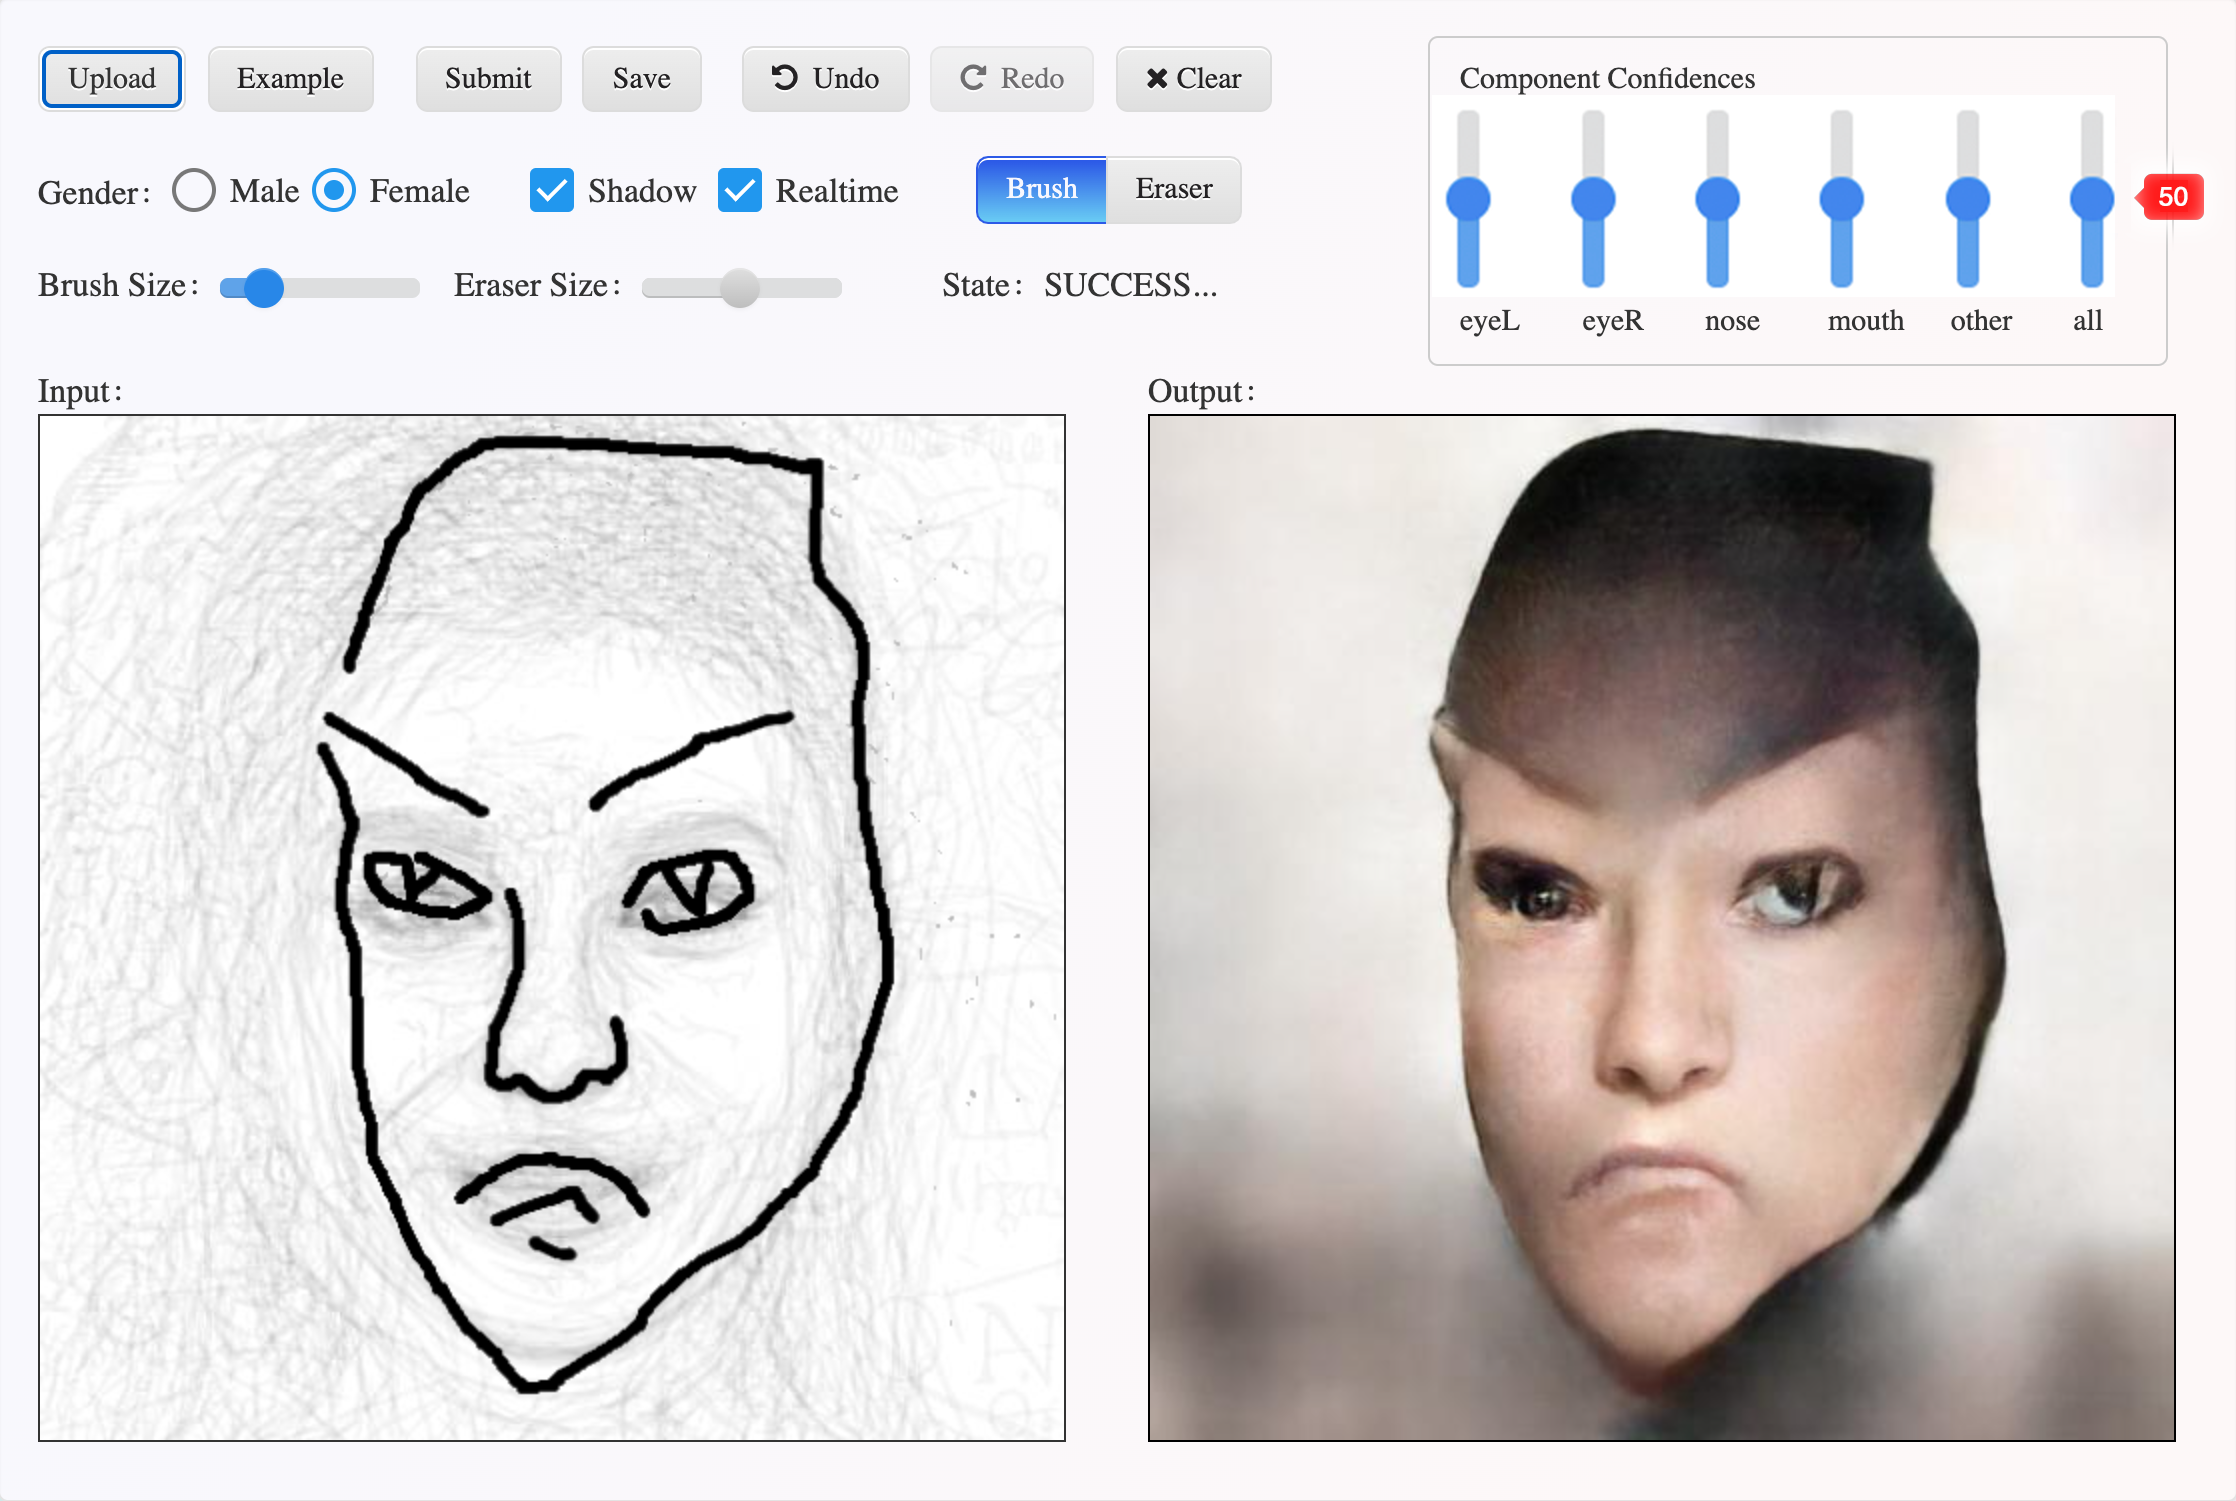 The picture is divided into two parts. On the left, there is a drawing of the outer shape of a face and two eyes. To the right, there is an AI-generated image of what a passport photo of the person drawn might look like.  